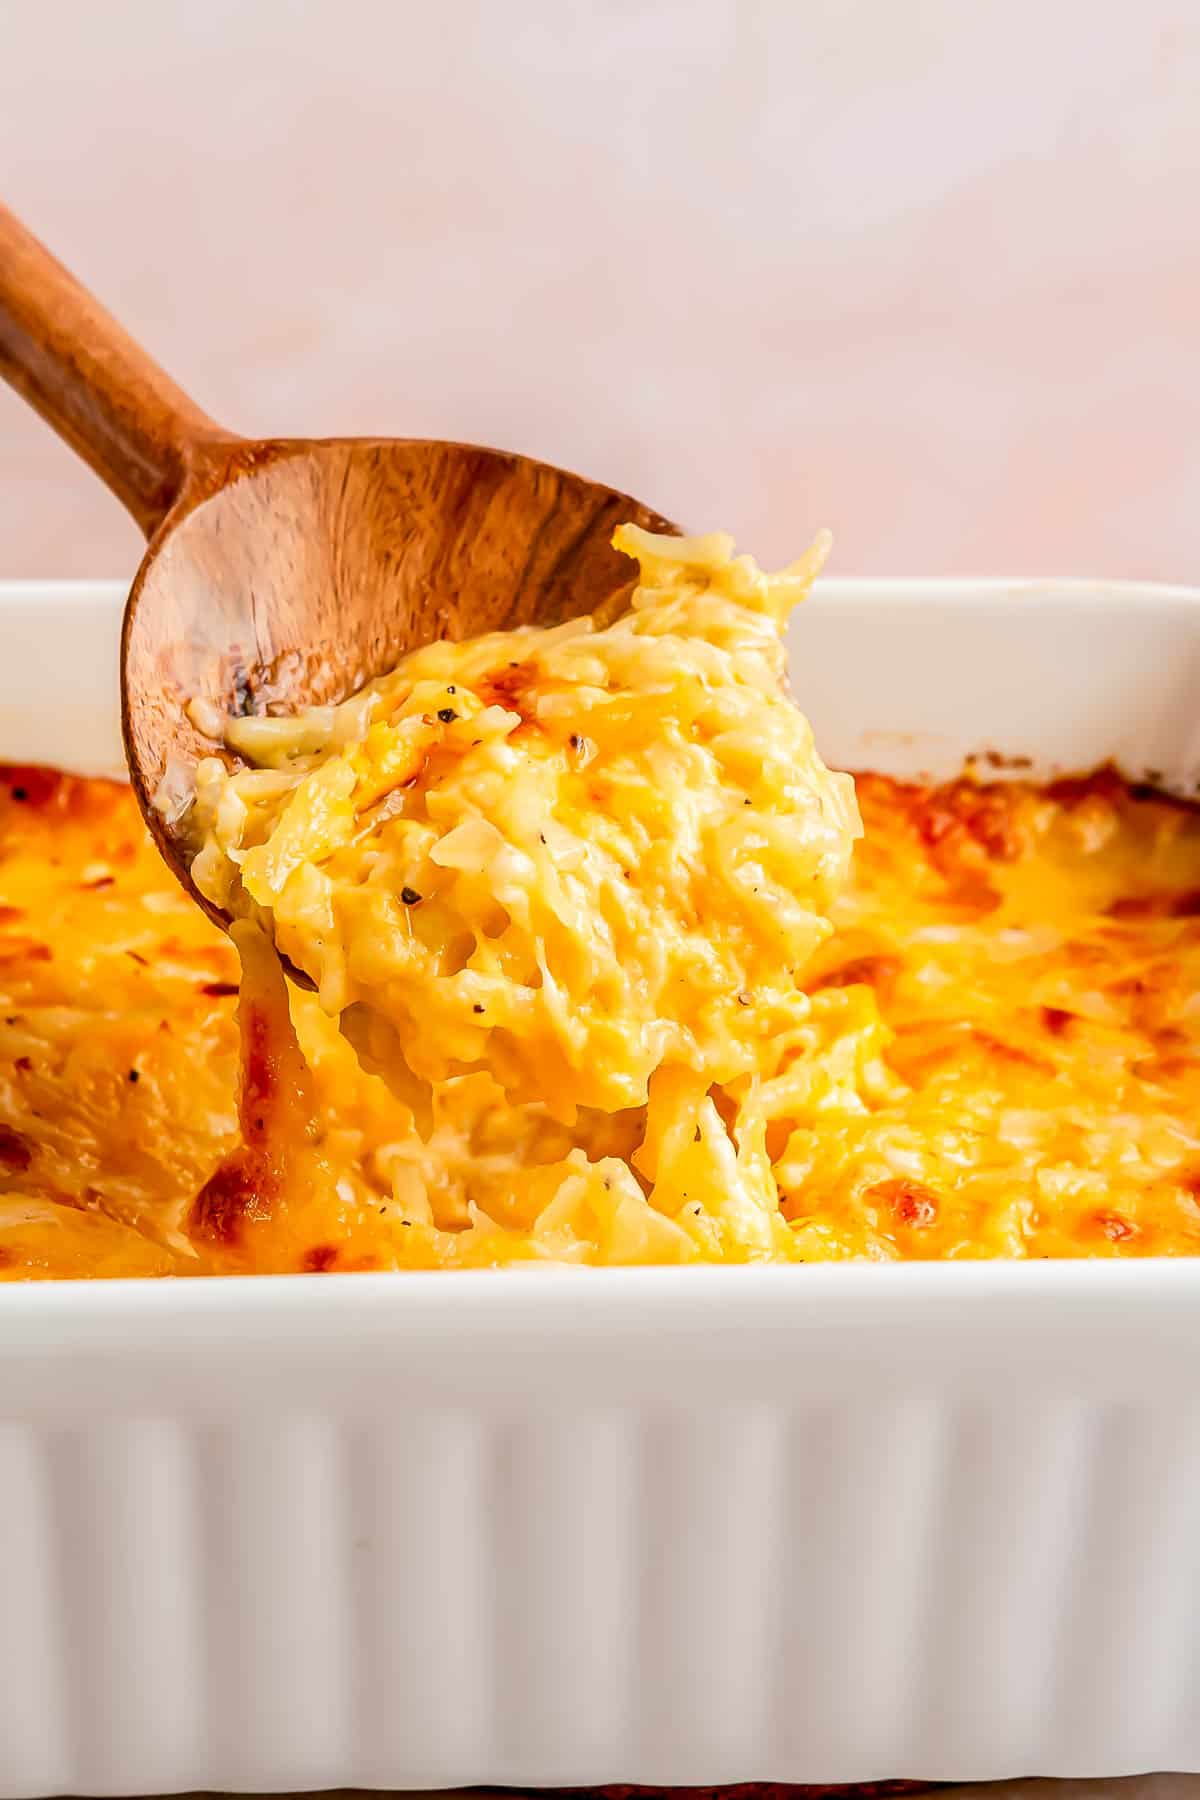 a wooden spoon scoops out cheesy hashbrown casserole from the baking dish